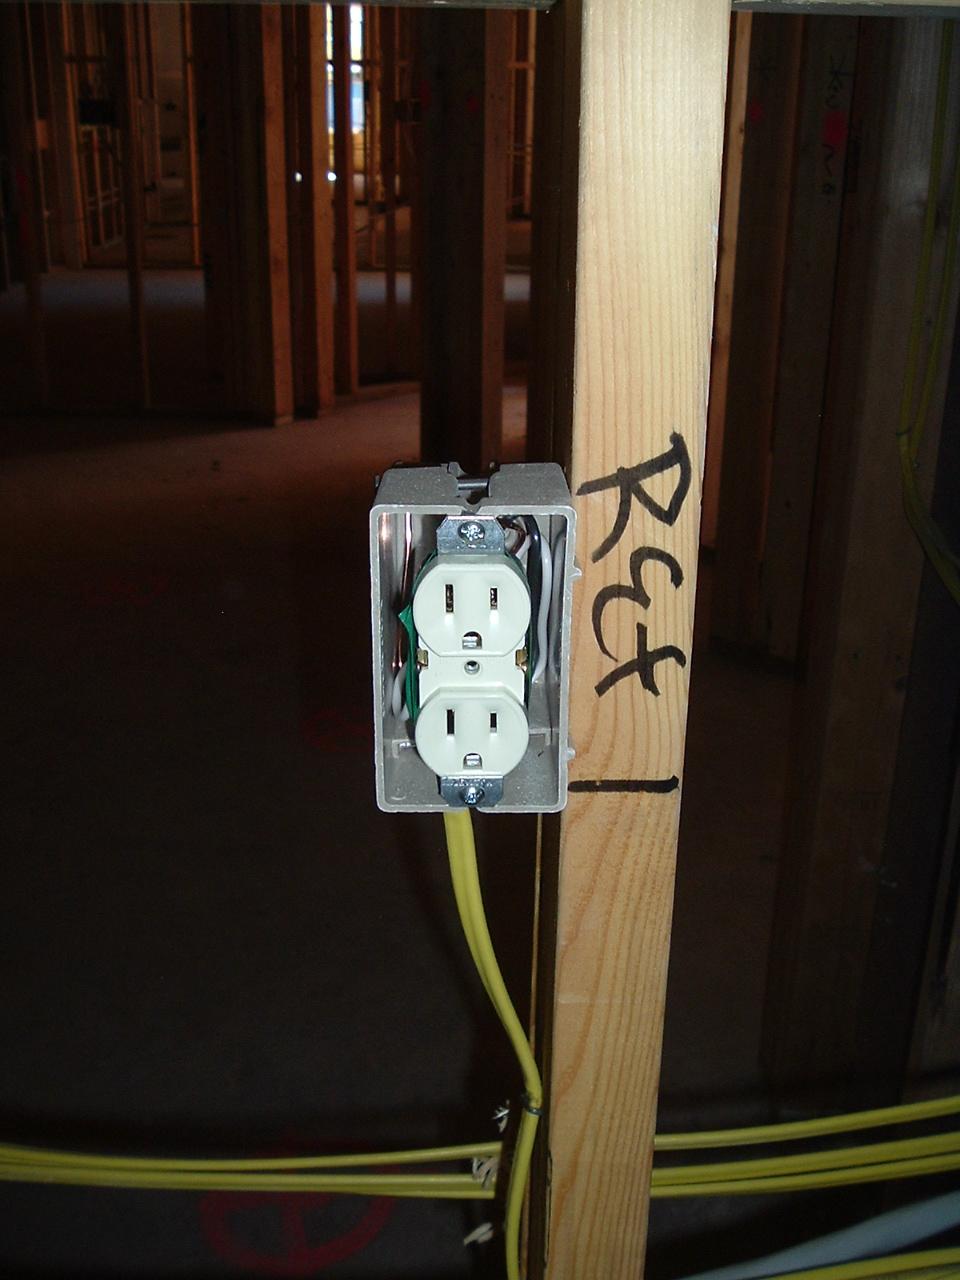 All Outlets in Firewall Must be 2 Hr UL Approved Electrical